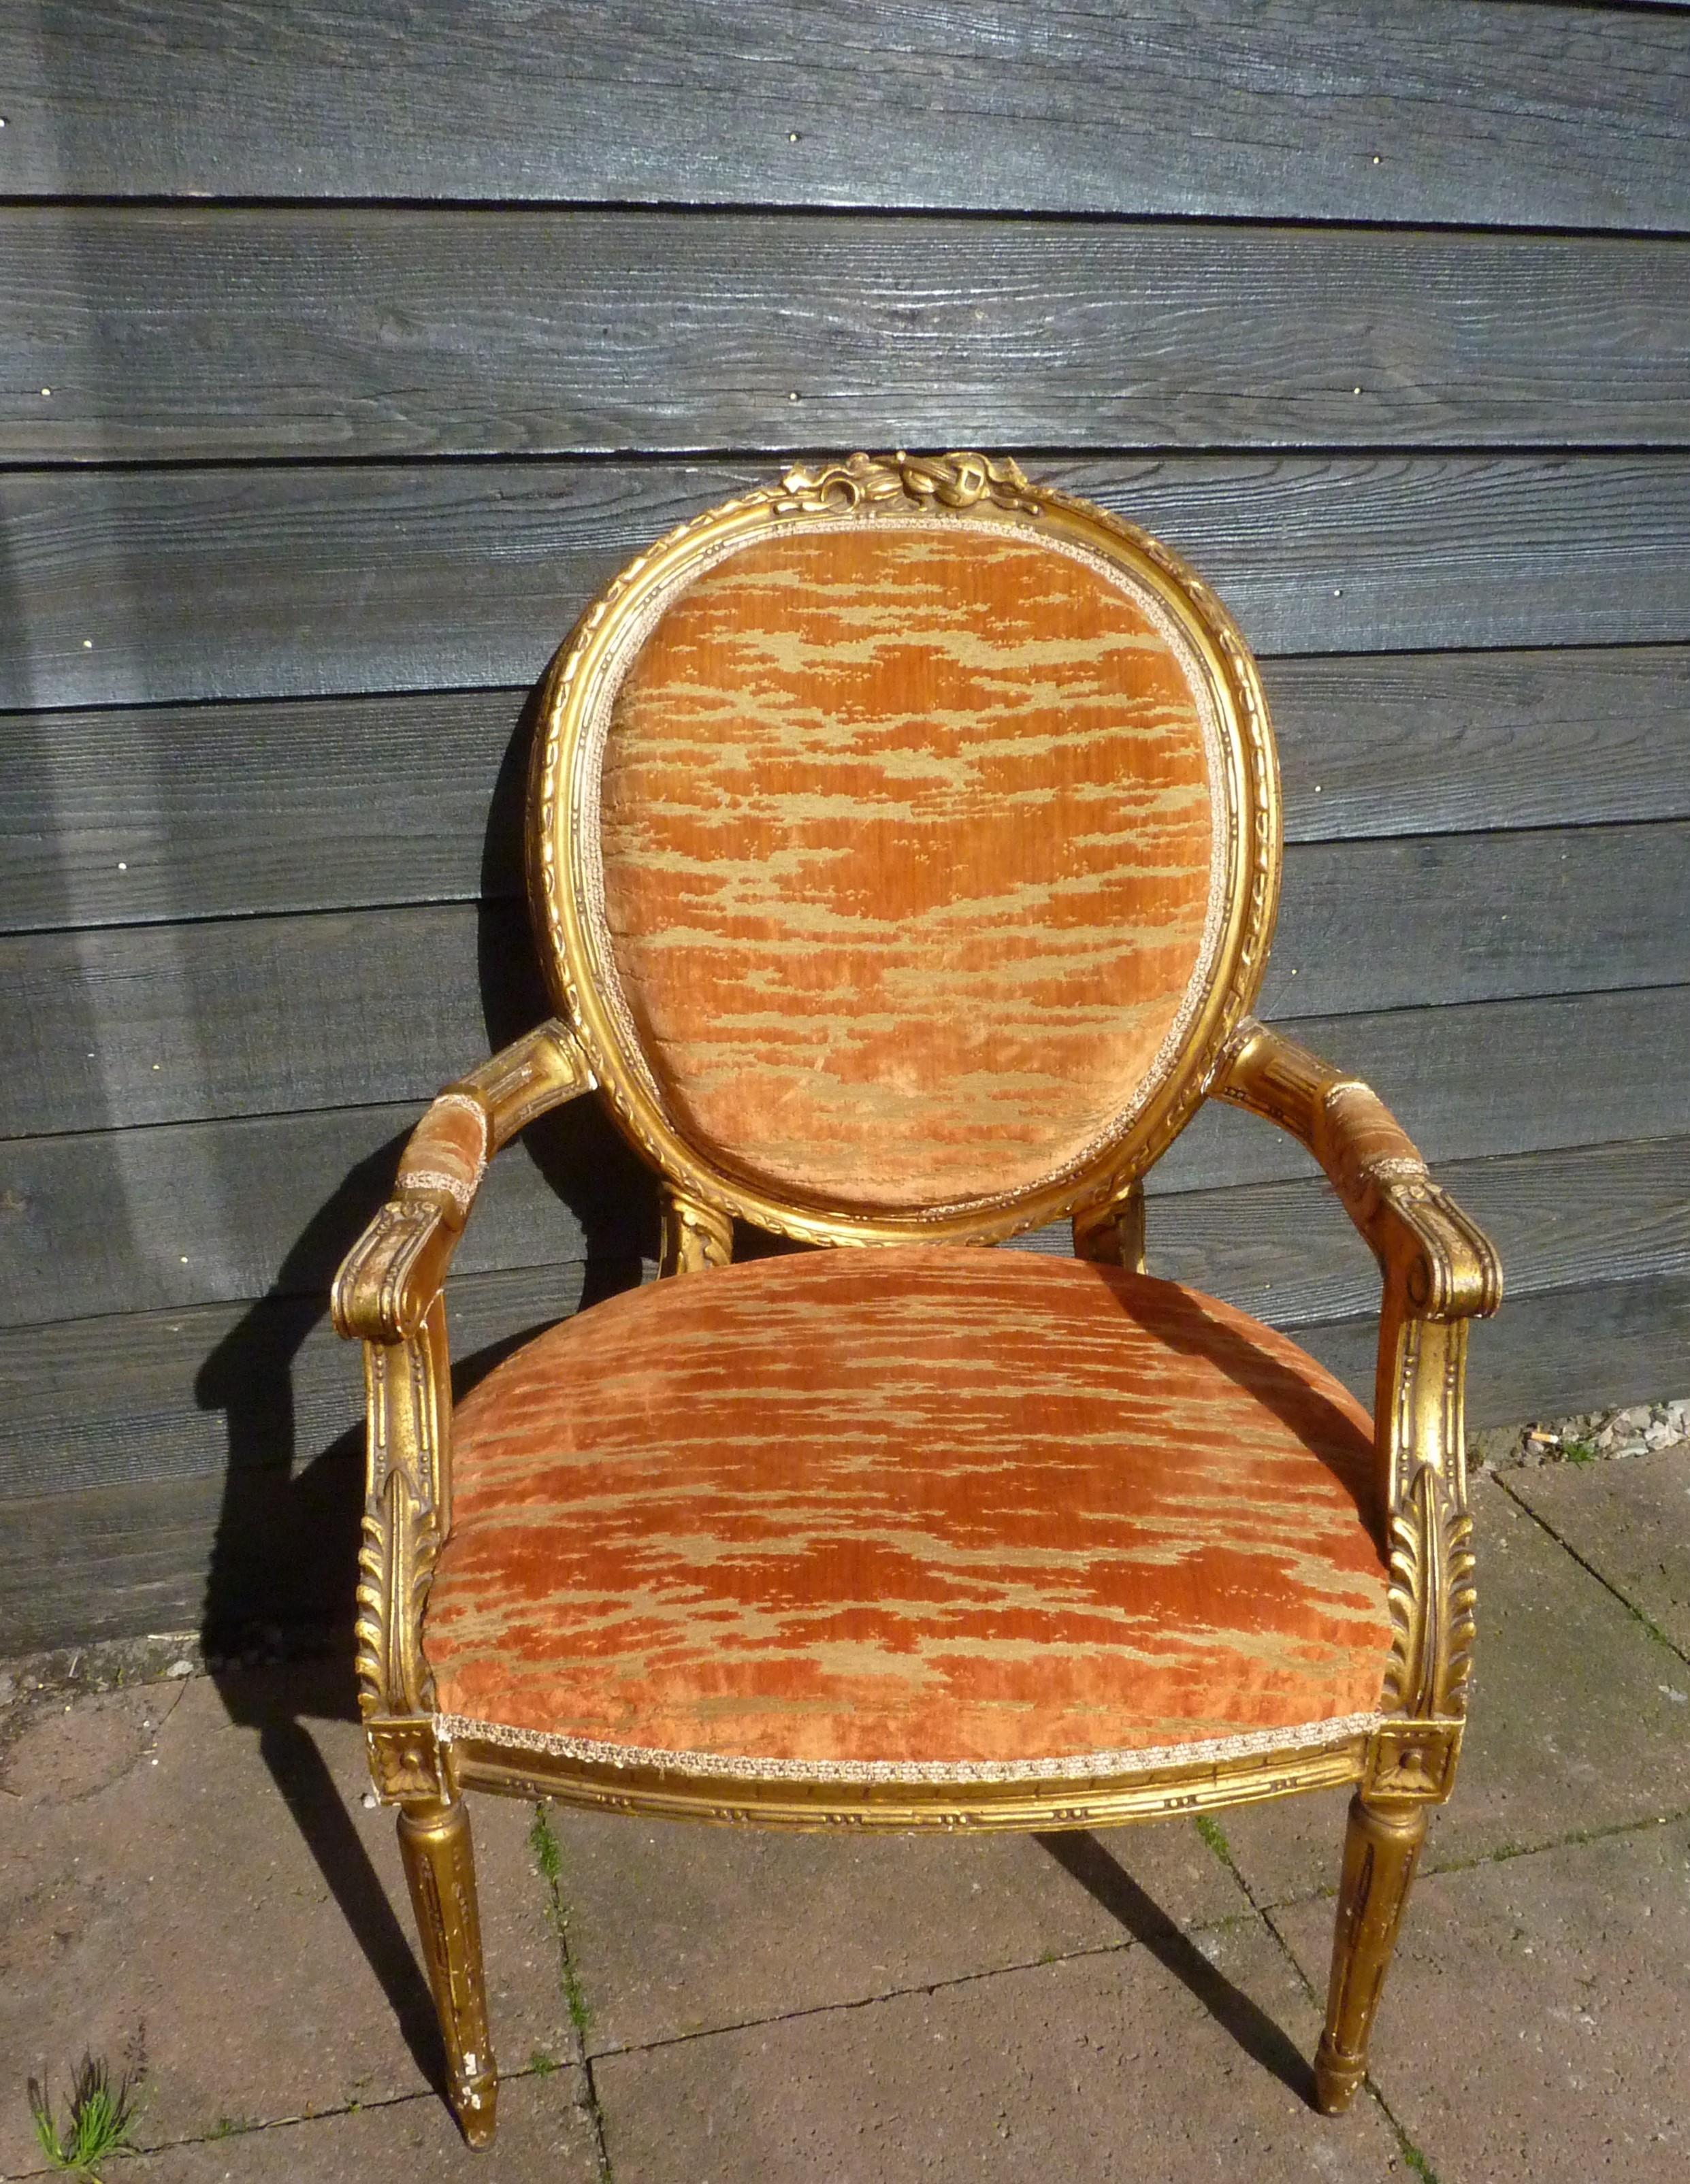 A pair of 20th century Louis seize style gilded chairs.
The chairs have a new interior, the seats with springs and a comfortable top layer, the back of the chairs are upholstered with a thickened back in the classic way with seagrass and